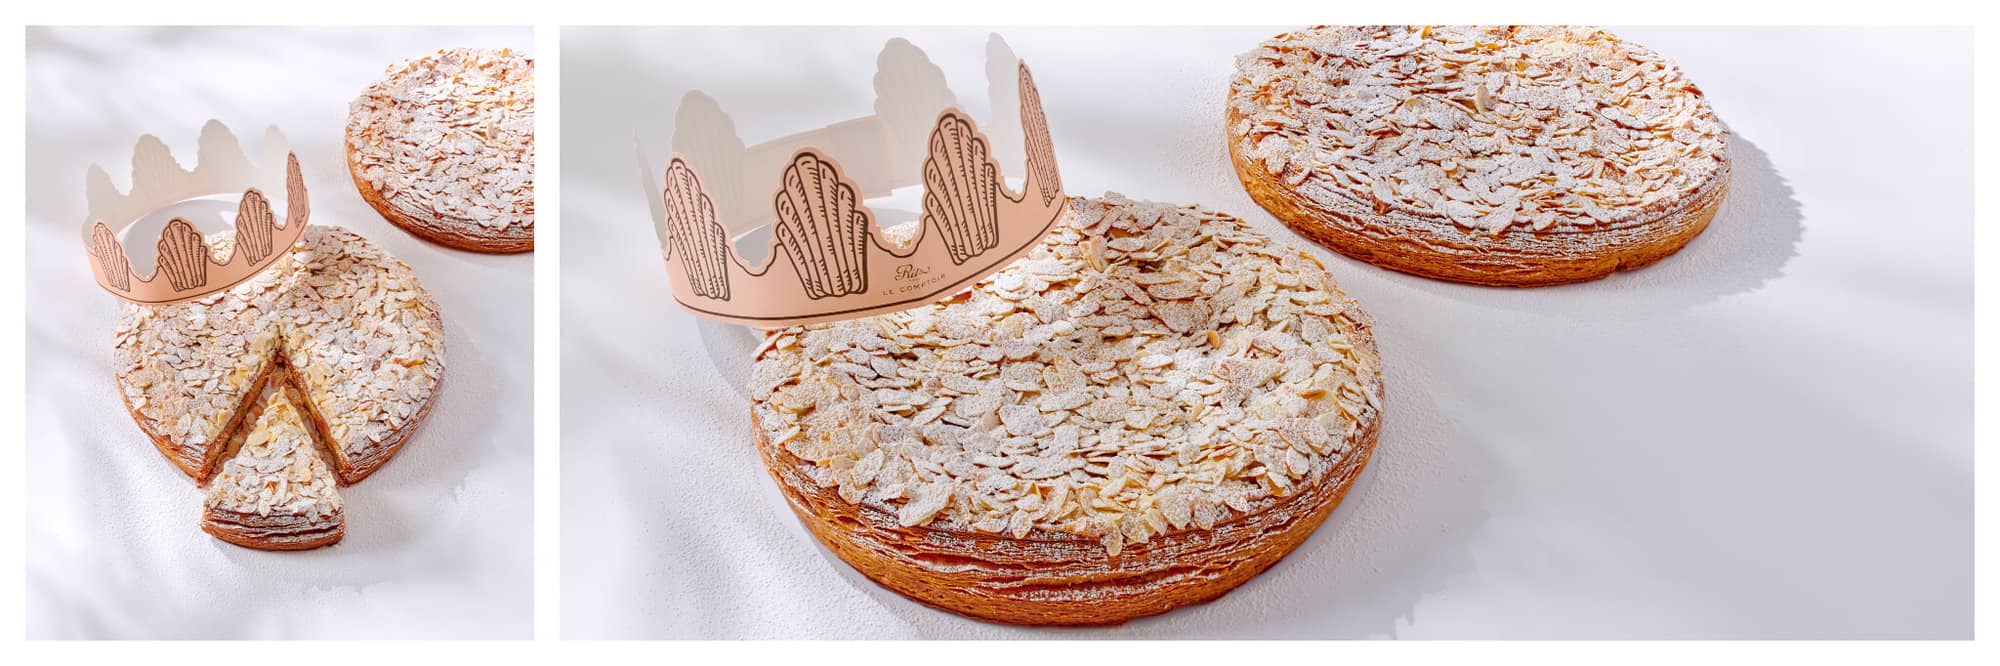 Galettes des rois topped with sliced almonds and icing sugar with a paper crown sitting on top by The Ritz Paris Le Comptoir. 